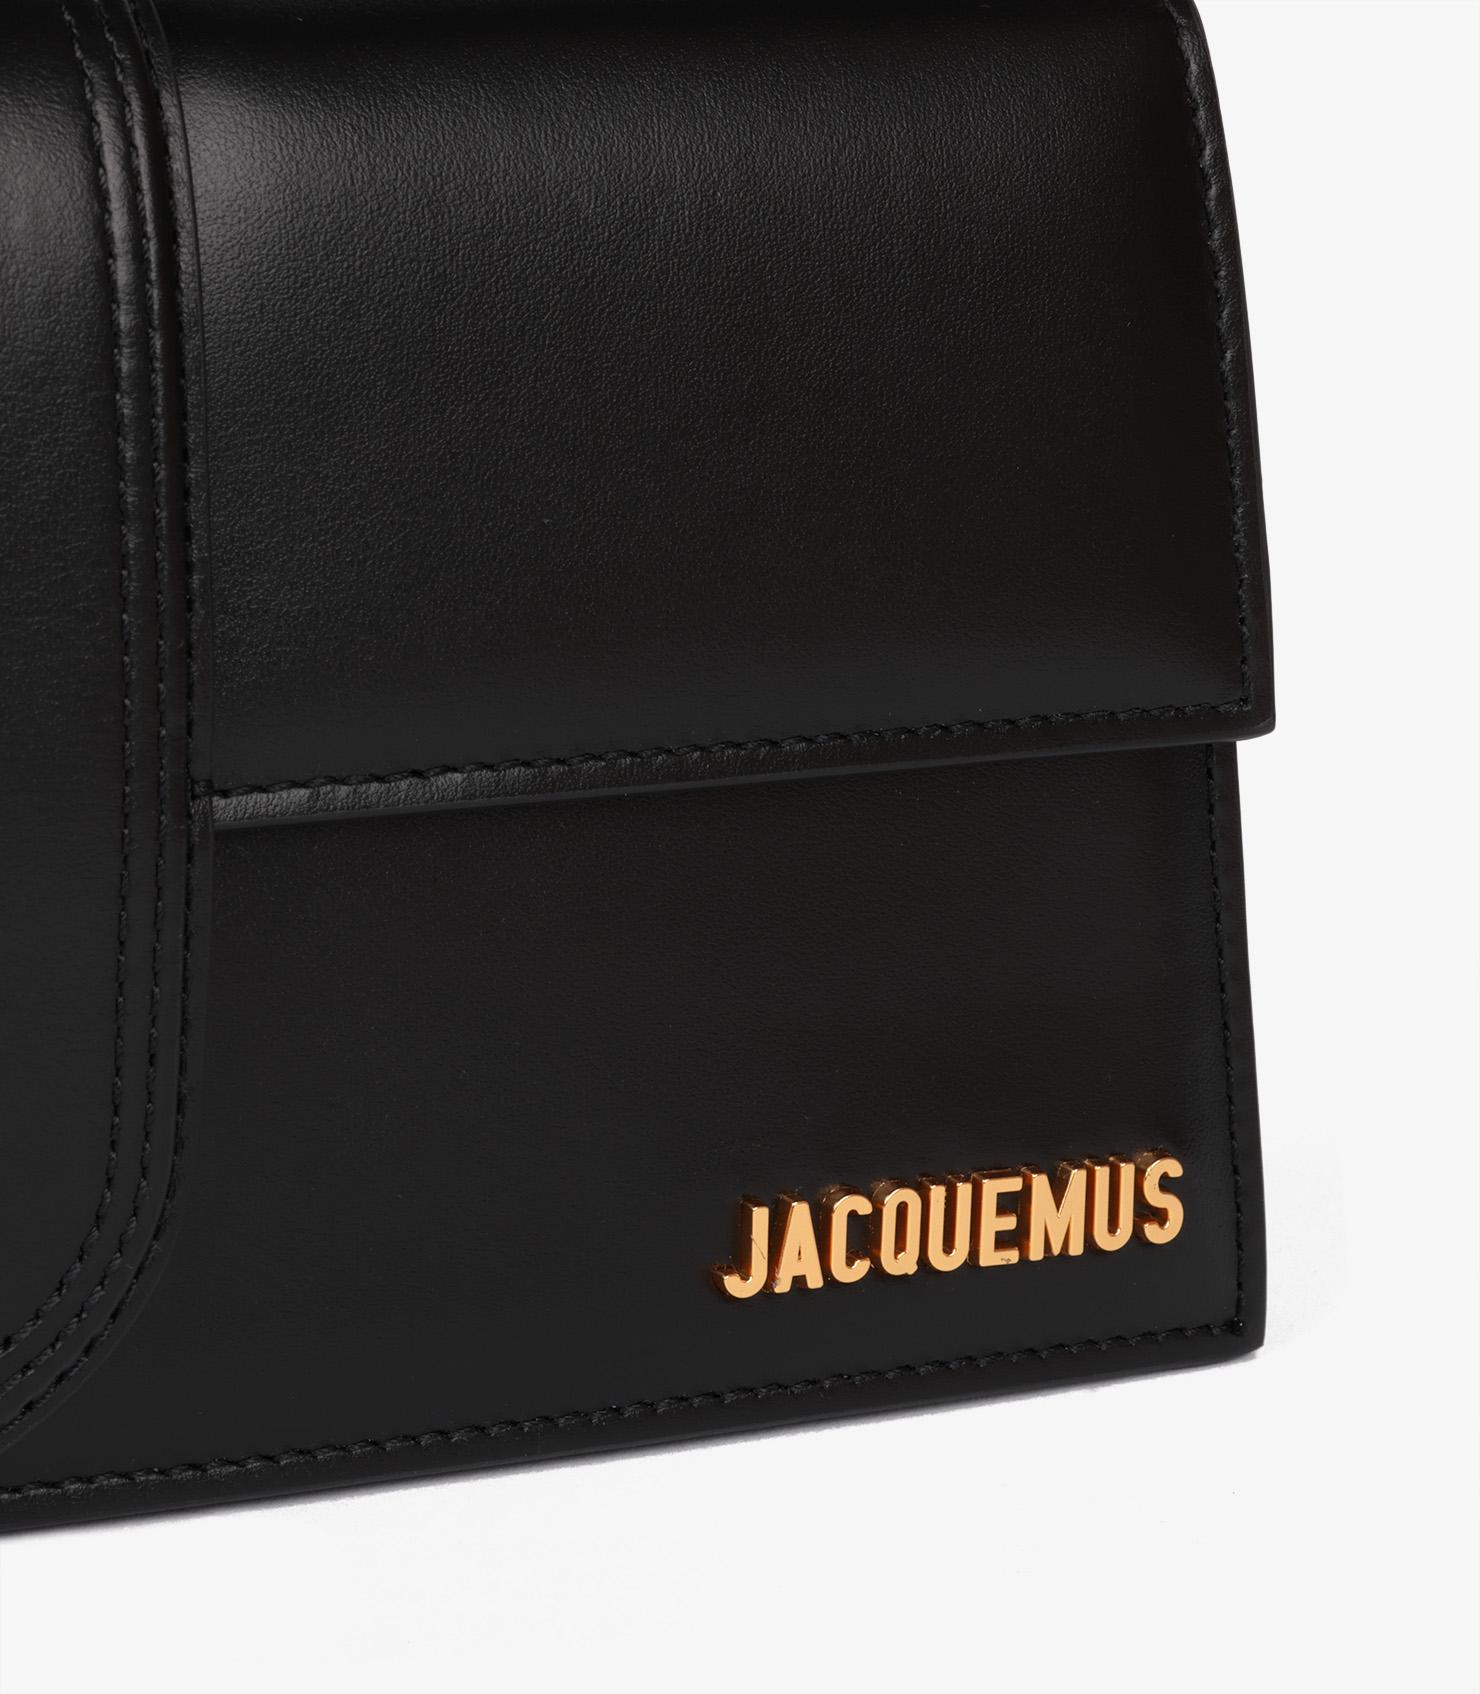 Jacquemus Black Smooth Calfskin Leather Le Bambino Long For Sale 4